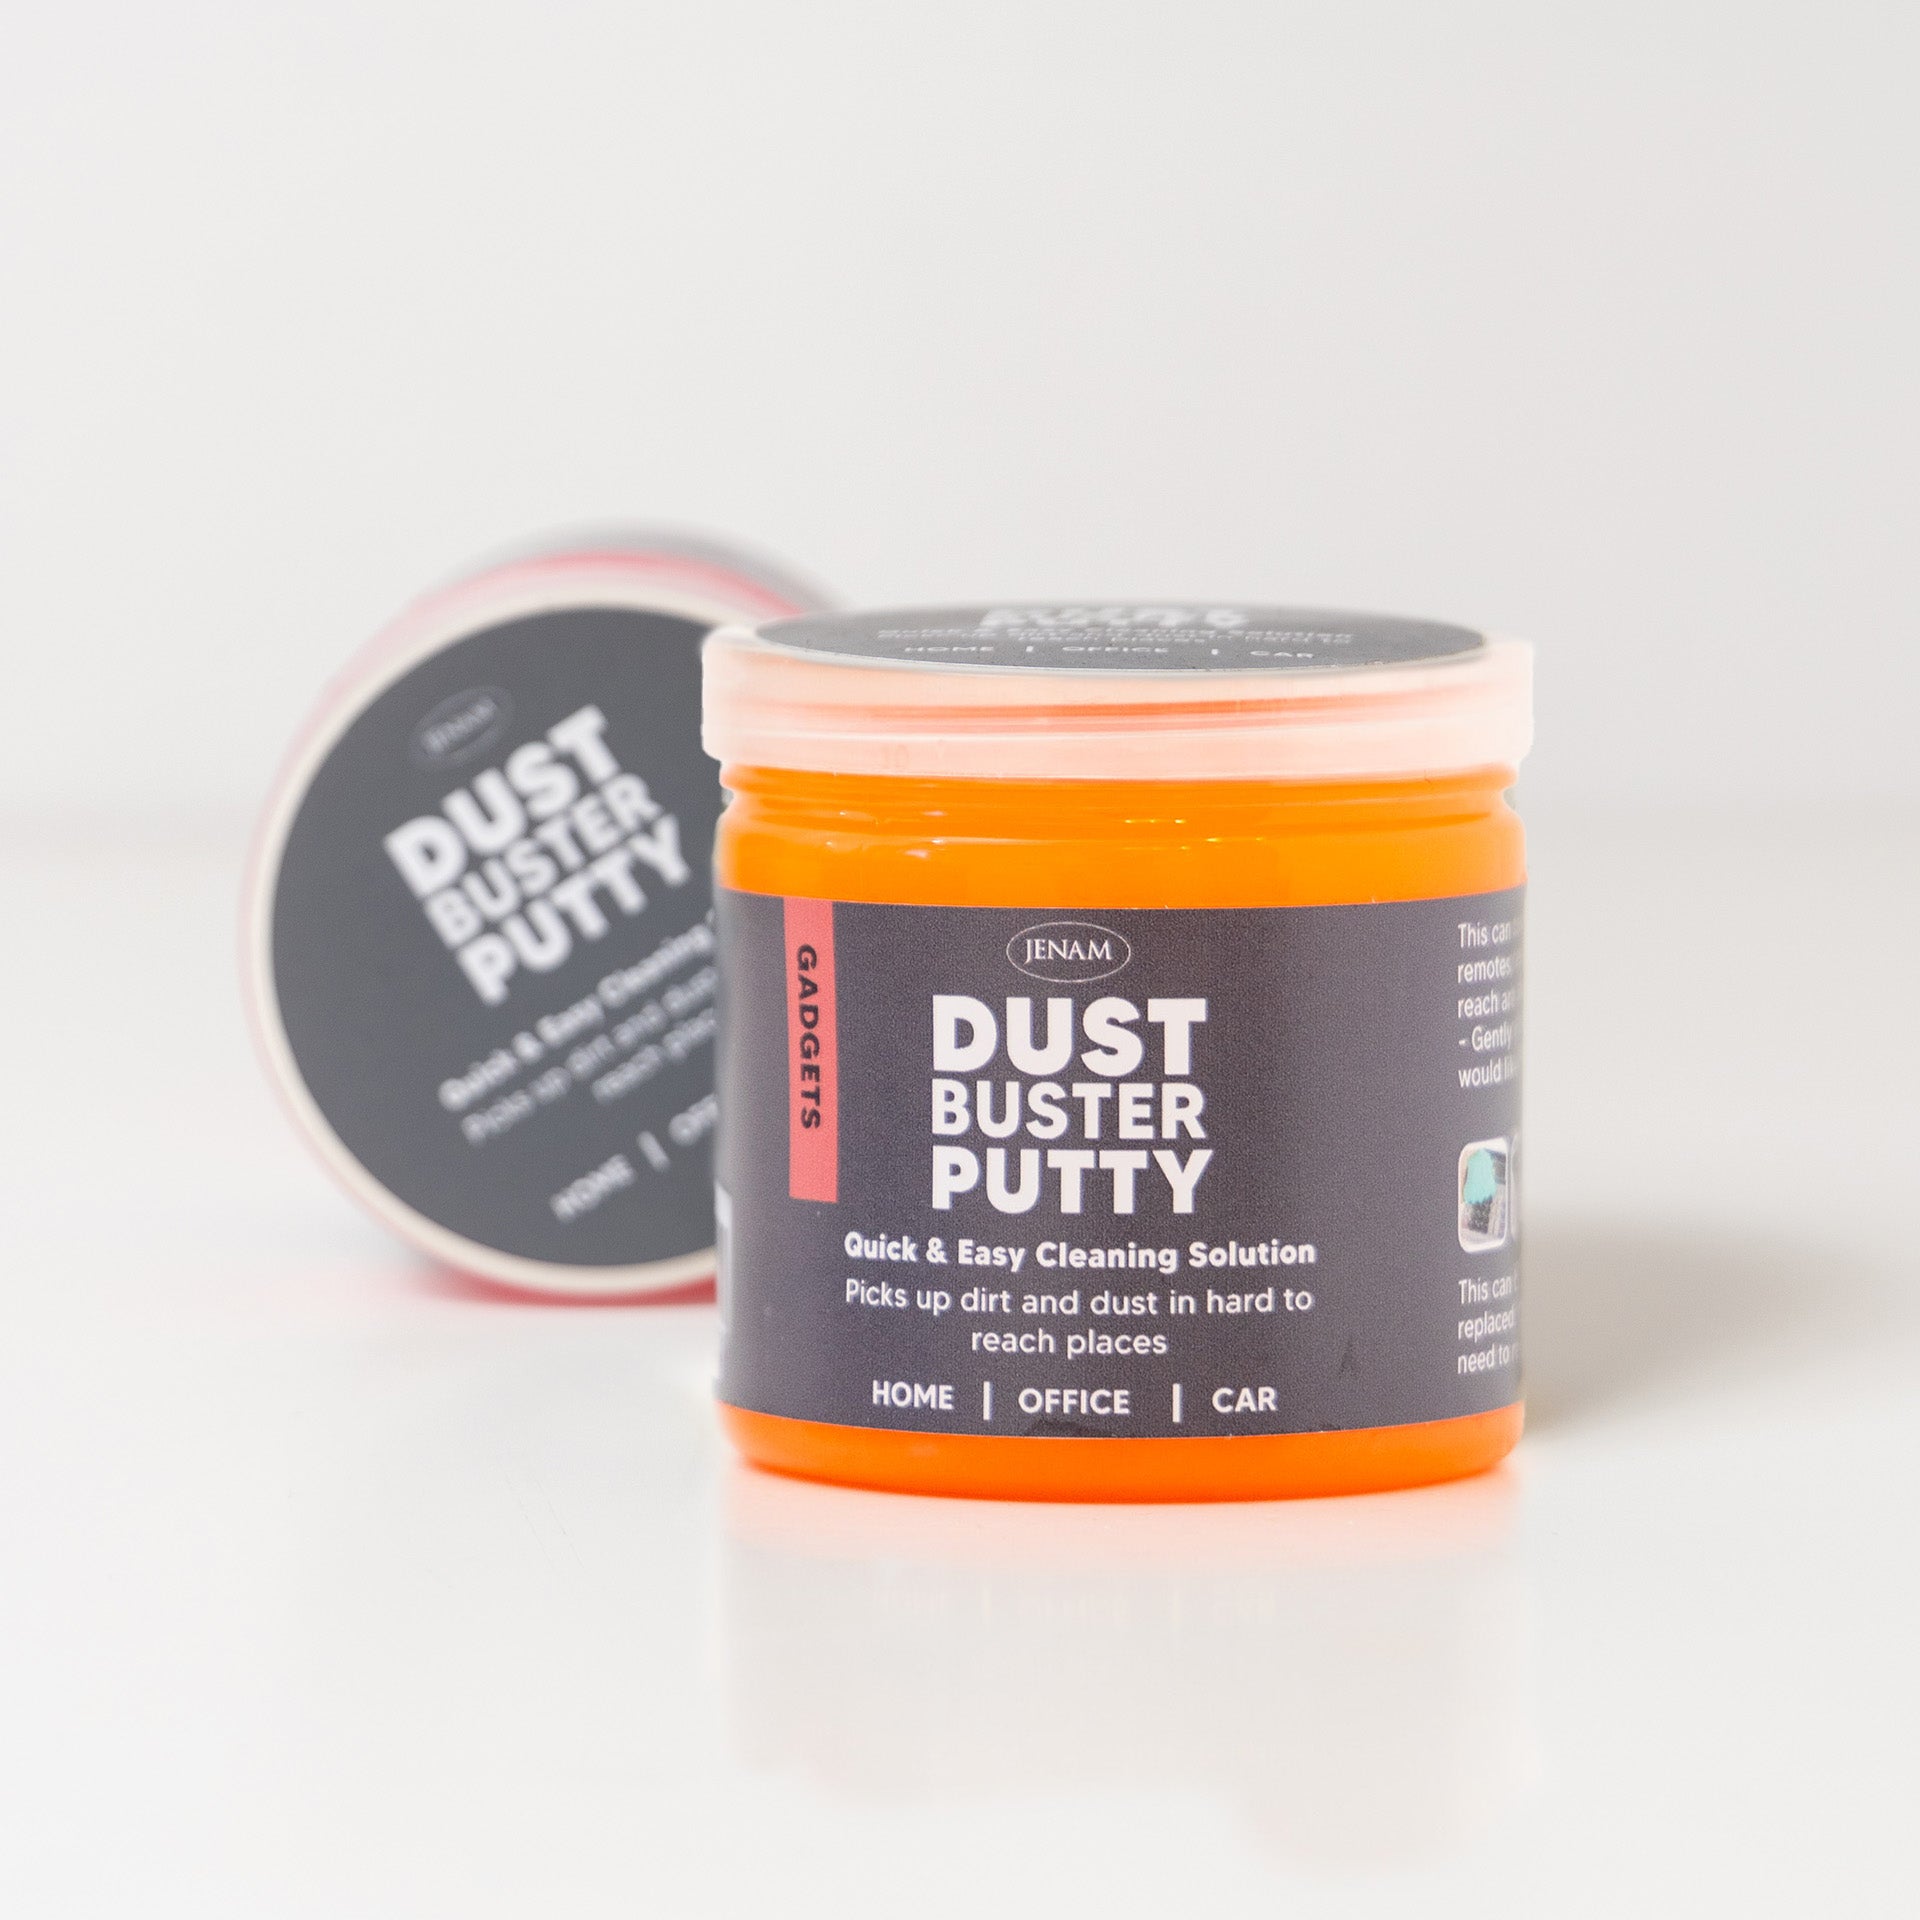 Tech Dust Buster Putty